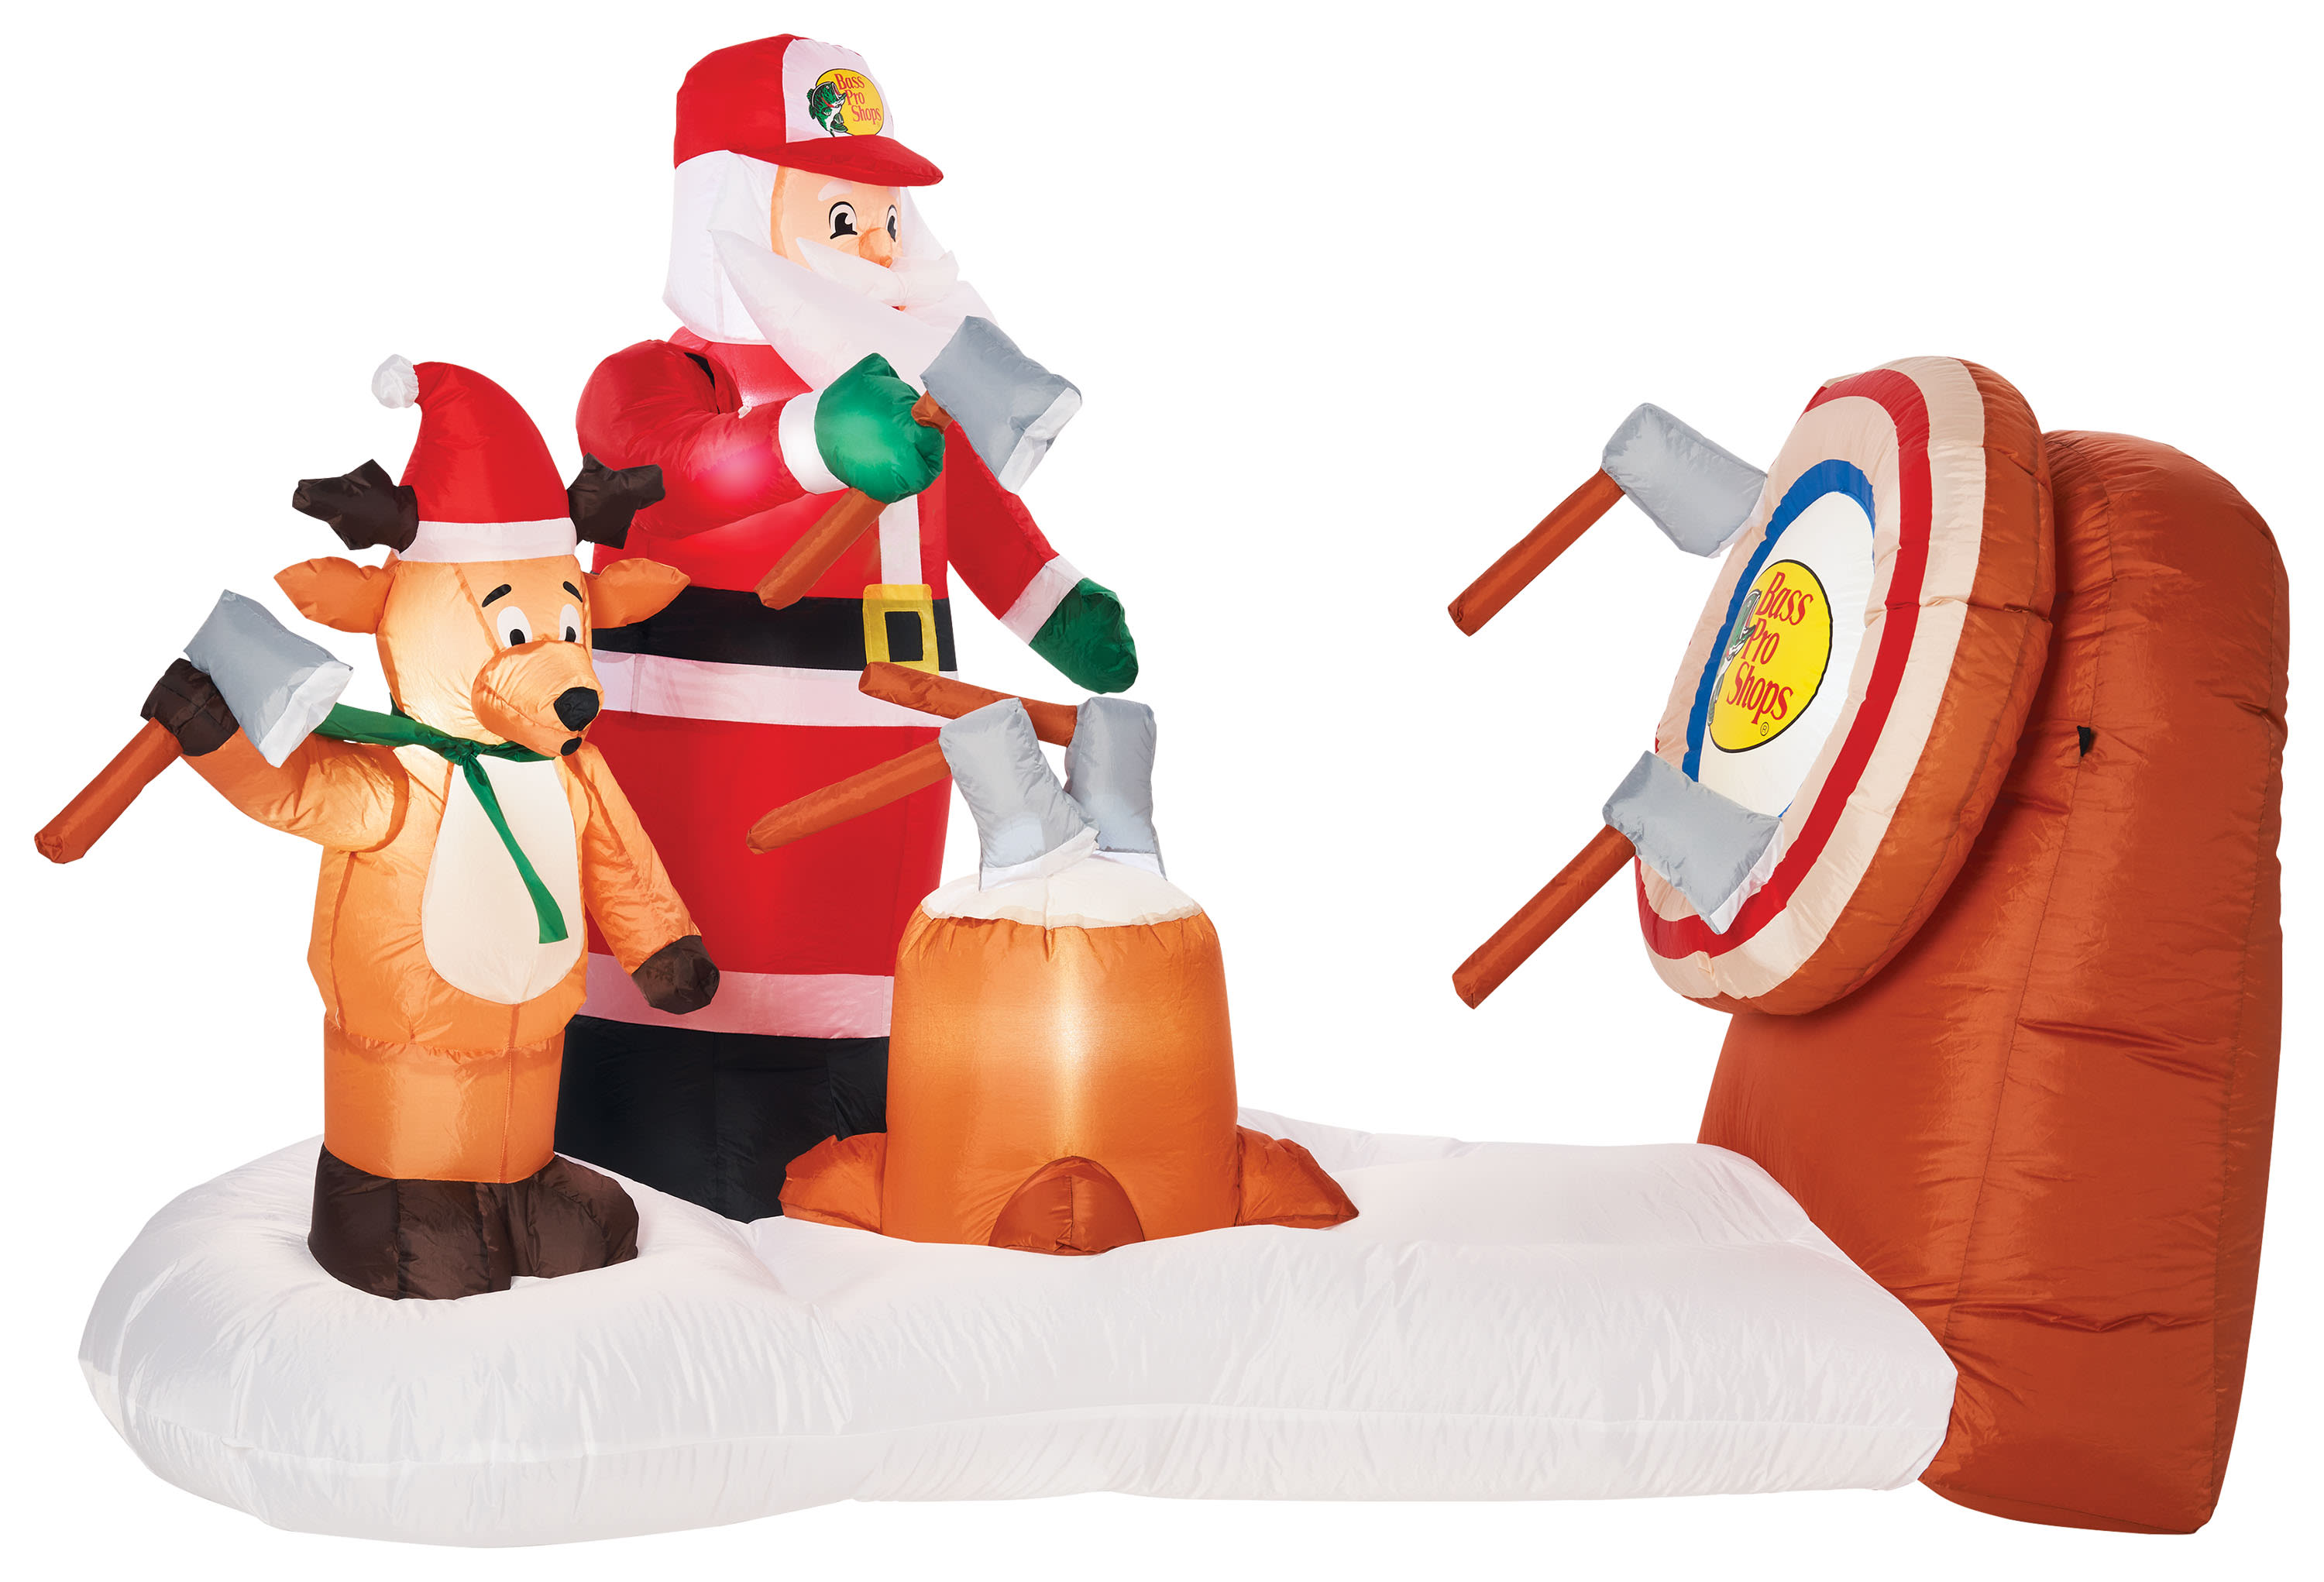 Bass Pro Shops® Animated Axe-Throwing Santa and Reindeer Inflatable